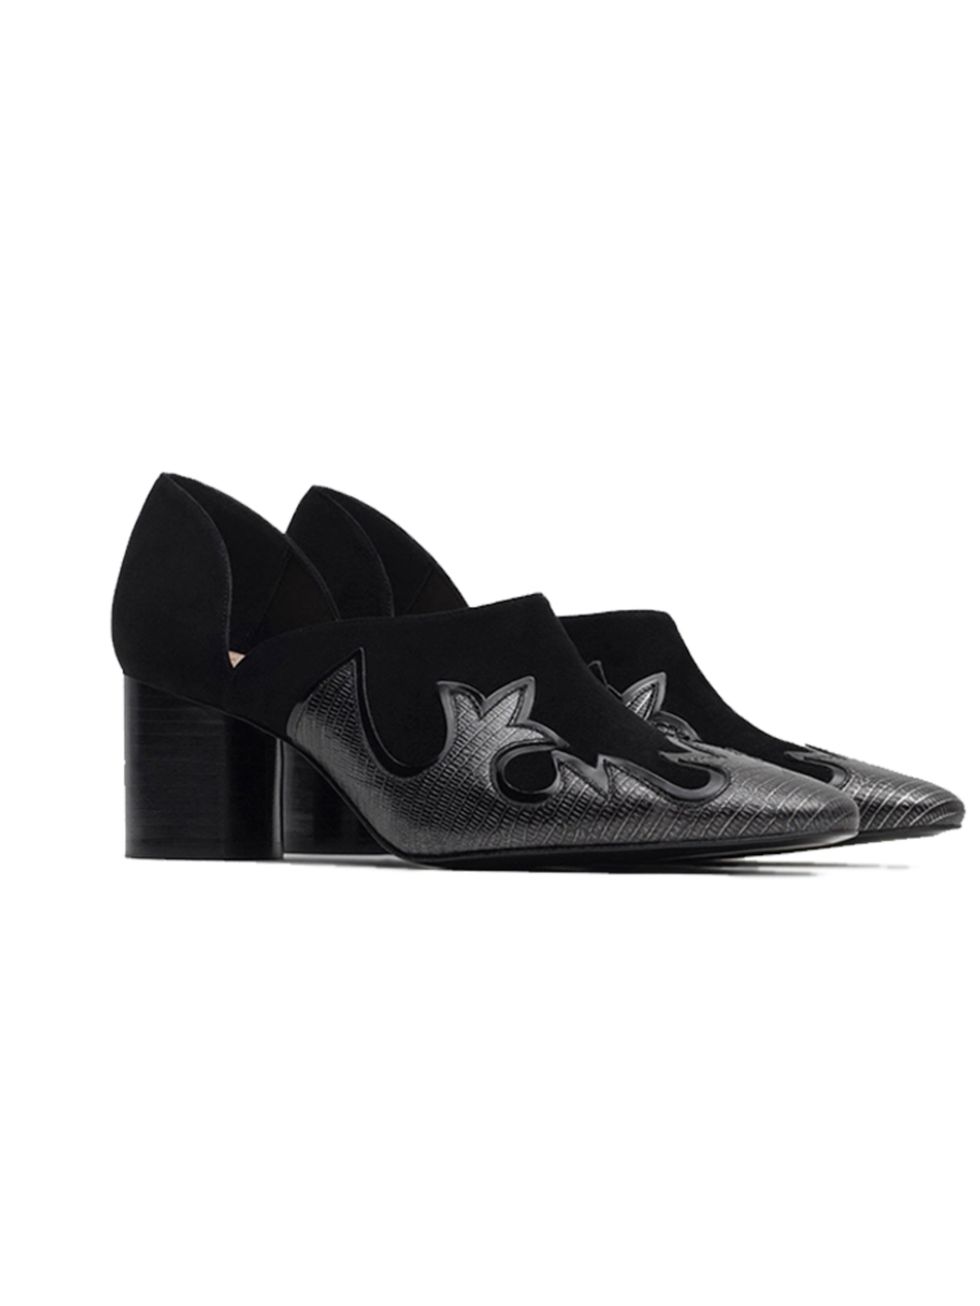 <p>Fashion Intern Emi Papanikola will be wearing these cowboy-inspired beauties with flared denim trousers for a 1970s look.</p>

<p><a href="http://www.zara.com/uk/en/new-in/woman/view-all/high-heel-shoes-with-cowboy-detail-c756542p2901041.html" target="